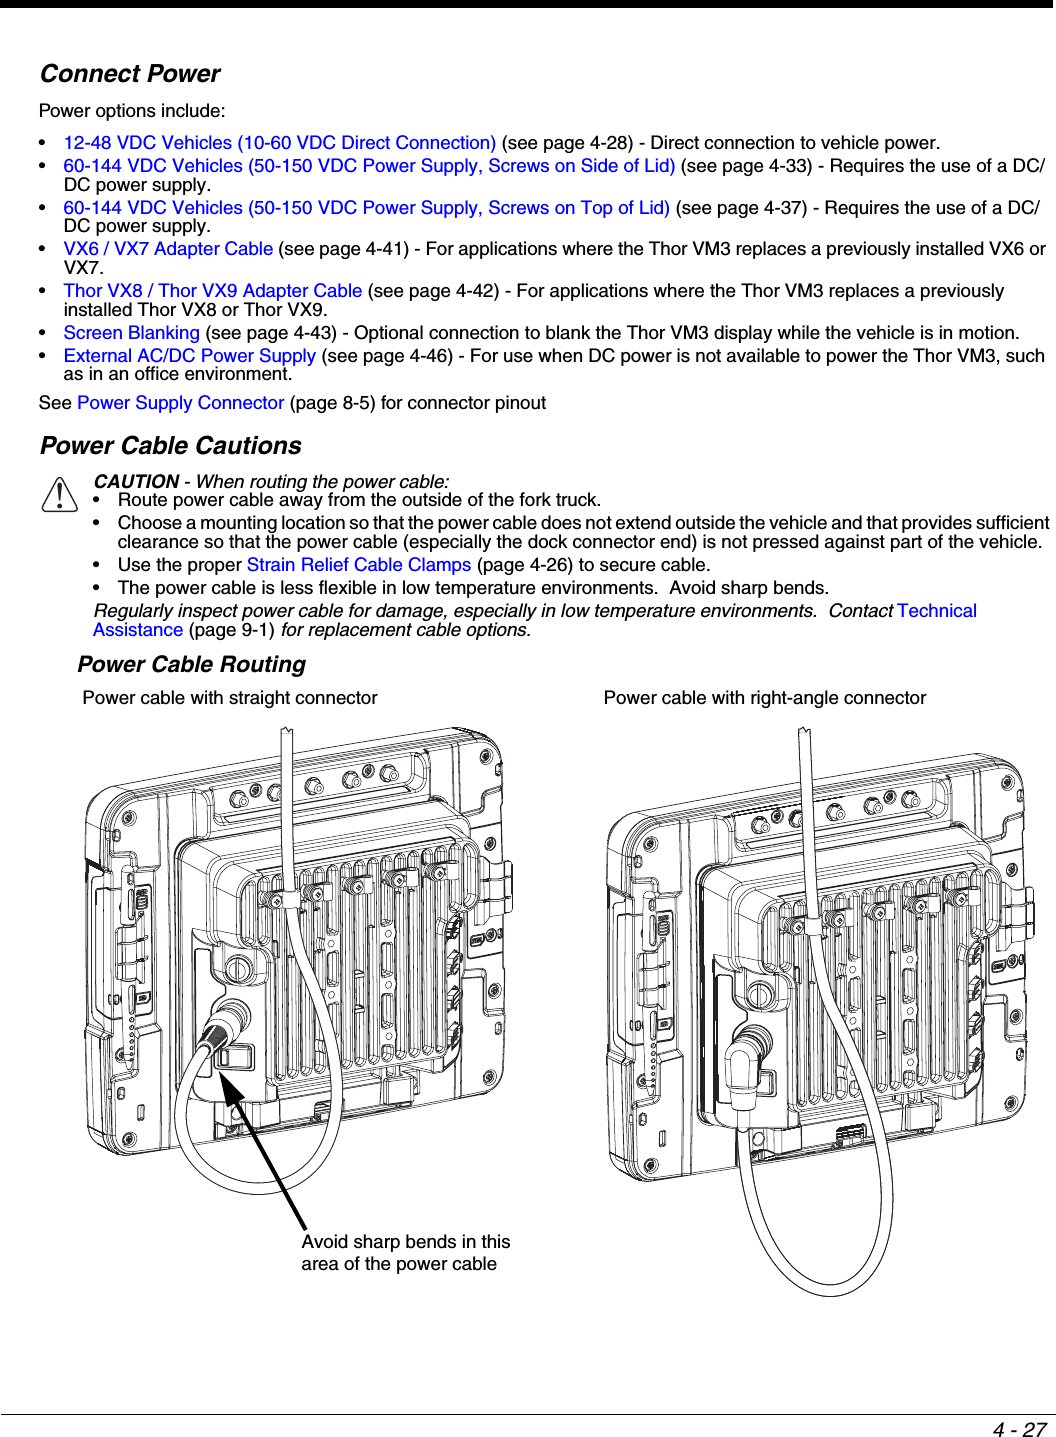 4 - 27Connect PowerPower options include:•12-48 VDC Vehicles (10-60 VDC Direct Connection) (see page 4-28) - Direct connection to vehicle power.•60-144 VDC Vehicles (50-150 VDC Power Supply, Screws on Side of Lid) (see page 4-33) - Requires the use of a DC/DC power supply.•60-144 VDC Vehicles (50-150 VDC Power Supply, Screws on Top of Lid) (see page 4-37) - Requires the use of a DC/DC power supply.•VX6 / VX7 Adapter Cable (see page 4-41) - For applications where the Thor VM3 replaces a previously installed VX6 or VX7.•Thor VX8 / Thor VX9 Adapter Cable (see page 4-42) - For applications where the Thor VM3 replaces a previously installed Thor VX8 or Thor VX9.•Screen Blanking (see page 4-43) - Optional connection to blank the Thor VM3 display while the vehicle is in motion.•External AC/DC Power Supply (see page 4-46) - For use when DC power is not available to power the Thor VM3, such as in an office environment.See Power Supply Connector (page 8-5) for connector pinoutPower Cable CautionsPower Cable Routing CAUTION - When routing the power cable:• Route power cable away from the outside of the fork truck.• Choose a mounting location so that the power cable does not extend outside the vehicle and that provides sufficient clearance so that the power cable (especially the dock connector end) is not pressed against part of the vehicle.• Use the proper Strain Relief Cable Clamps (page 4-26) to secure cable.• The power cable is less flexible in low temperature environments.  Avoid sharp bends.Regularly inspect power cable for damage, especially in low temperature environments.  Contact Technical Assistance (page 9-1) for replacement cable options.Power cable with straight connector Power cable with right-angle connector!Avoid sharp bends in thisarea of the power cable